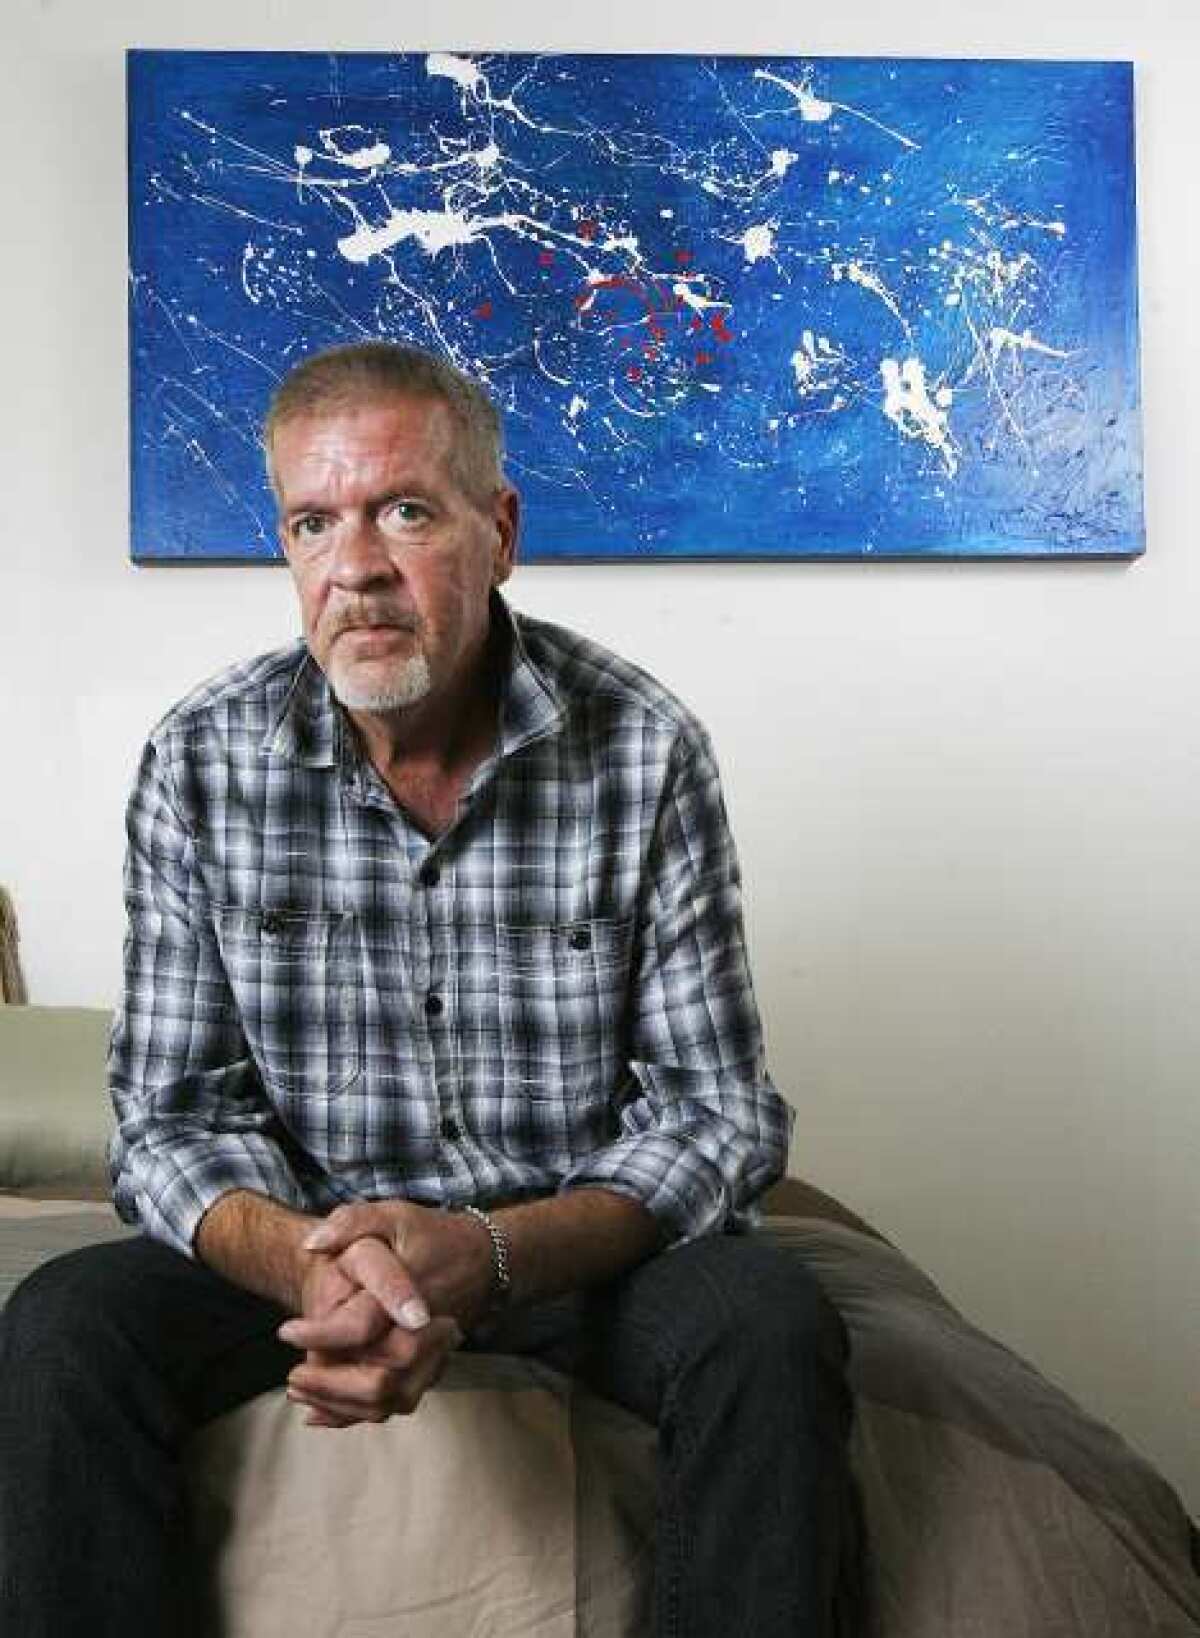 Lanny Allen sits on his bed with donated artwork behind him in his home in Glendale where he has lived for four weeks. Allen, with help from Ascencia, a nonprofit homeless services provider, and federal grants since he is a veteran, received the apartment and the furnishings through donations. He is happy and proud of his new life.